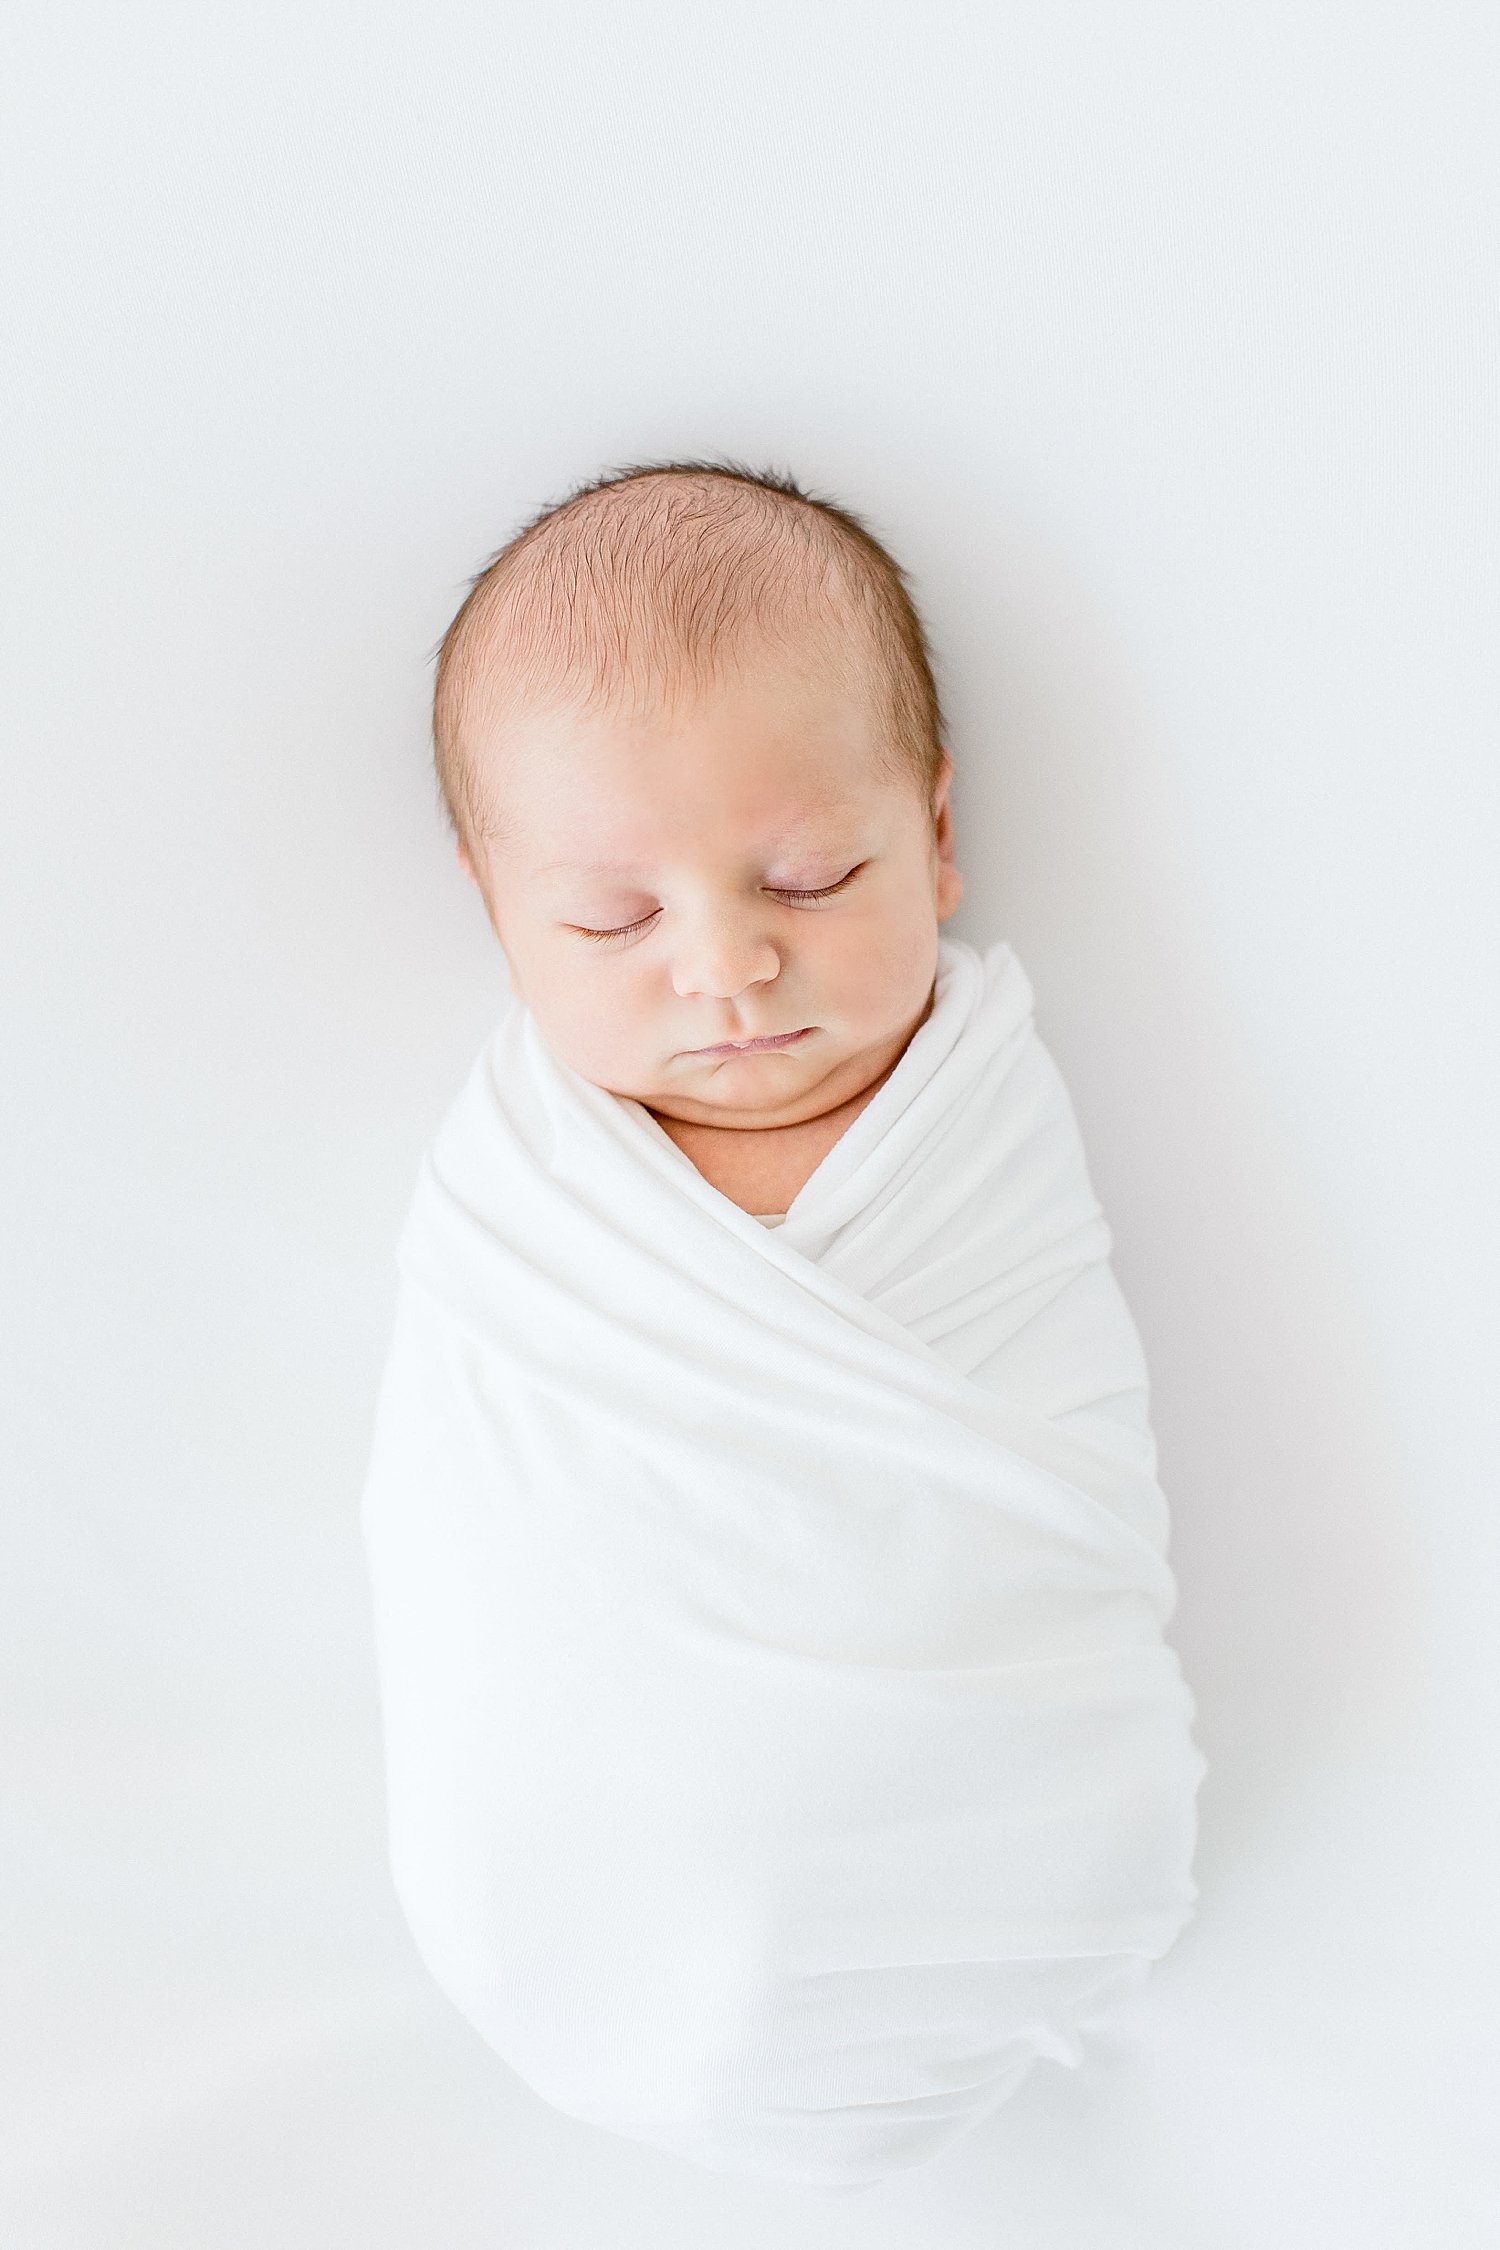 Newborn baby boy swaddled in white | Ambre Williams Photography